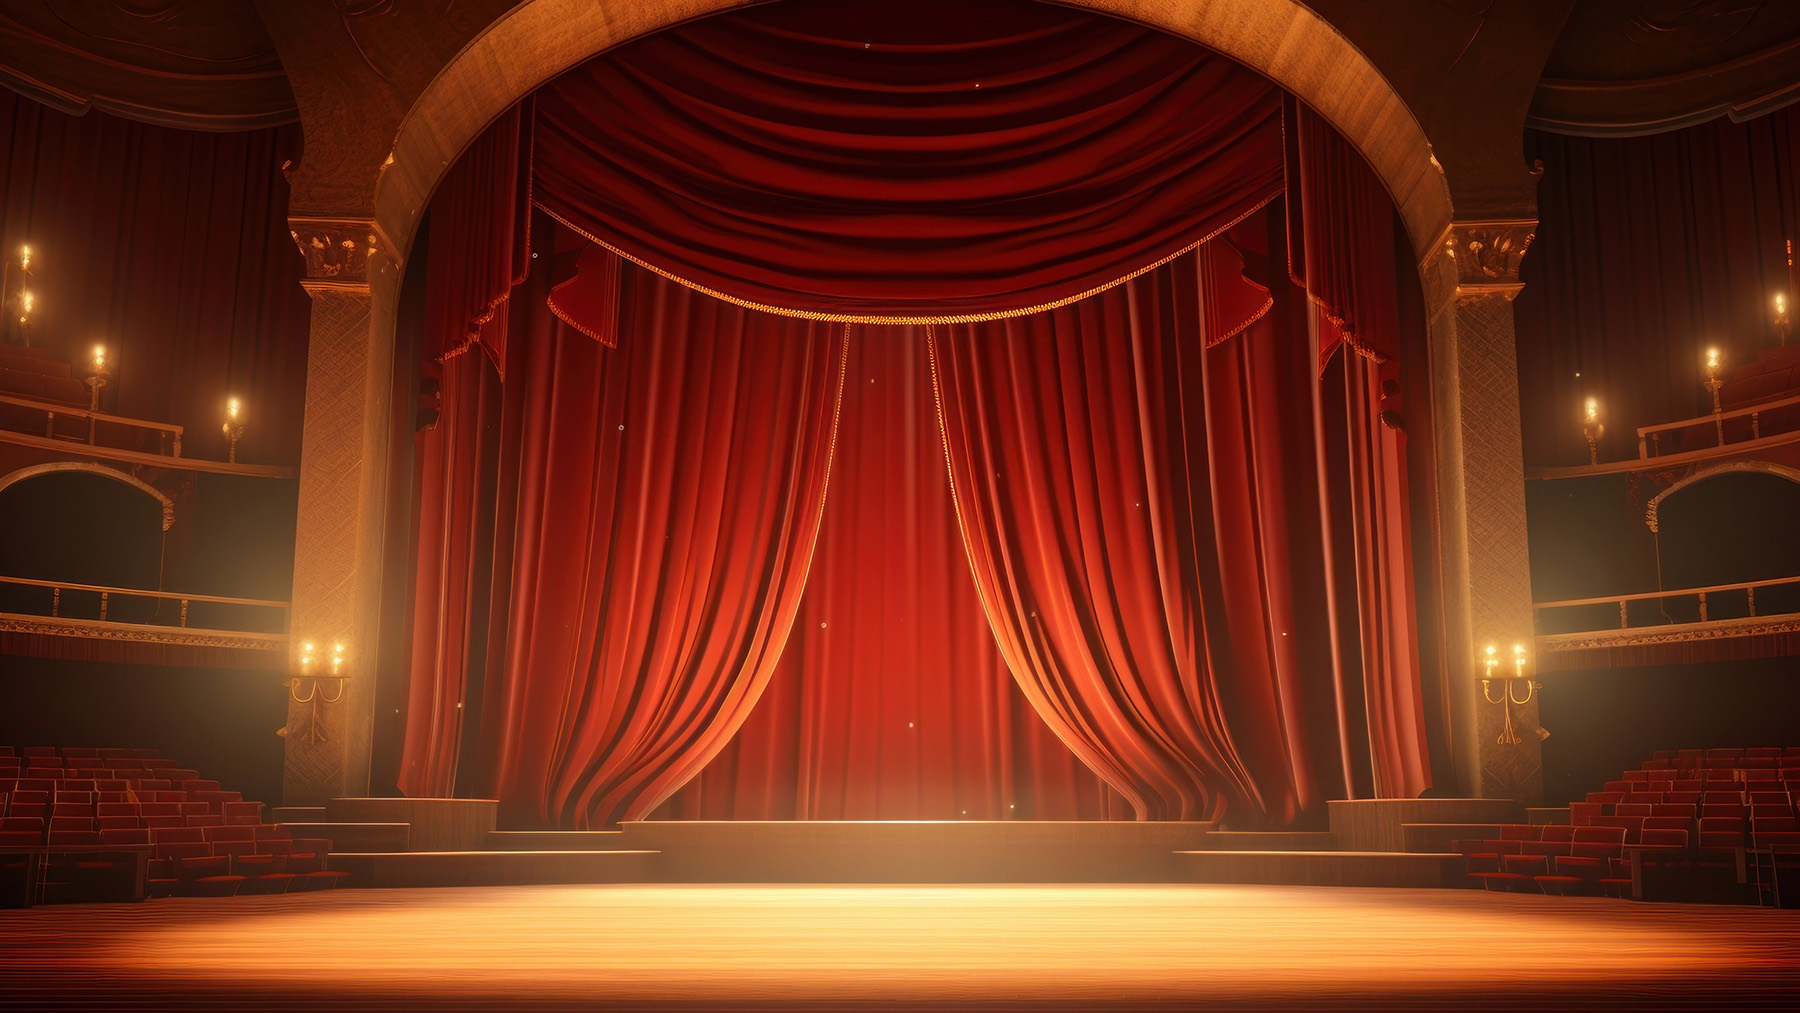 An AI-generated image of a stage and empty theatre, courtesy of RawPixel.com